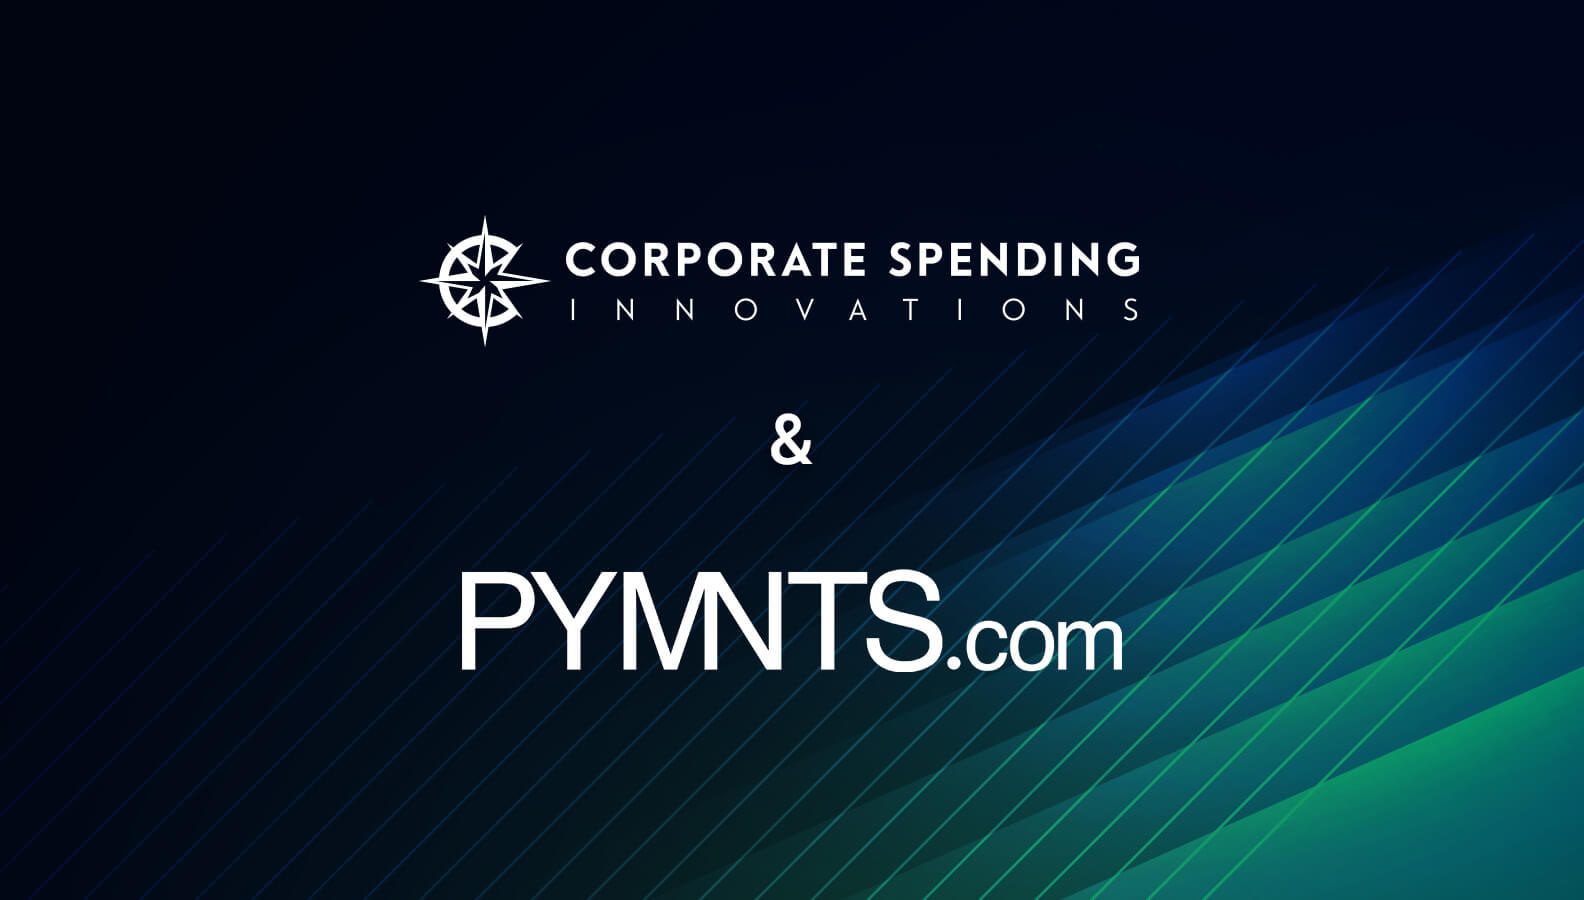 CSI to Participate in Three Roundtable Sessions with PYMNTS.com to Discuss Trends in B2B Payments